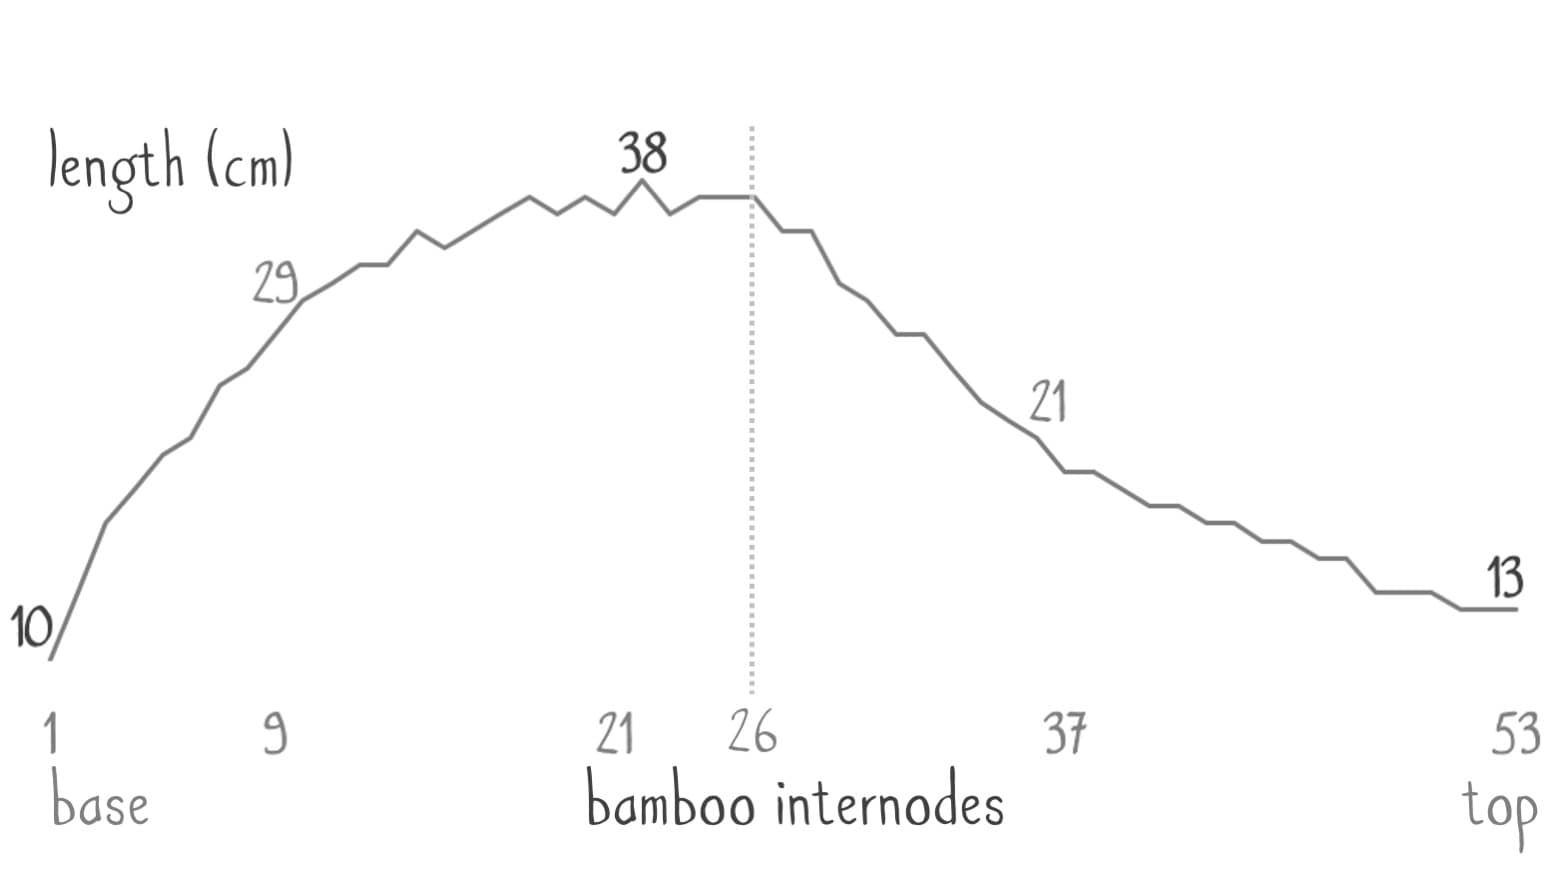 bamboo-internode-curve.jpg.pagespeed.ce.mhEFQ7l1rx.jpg